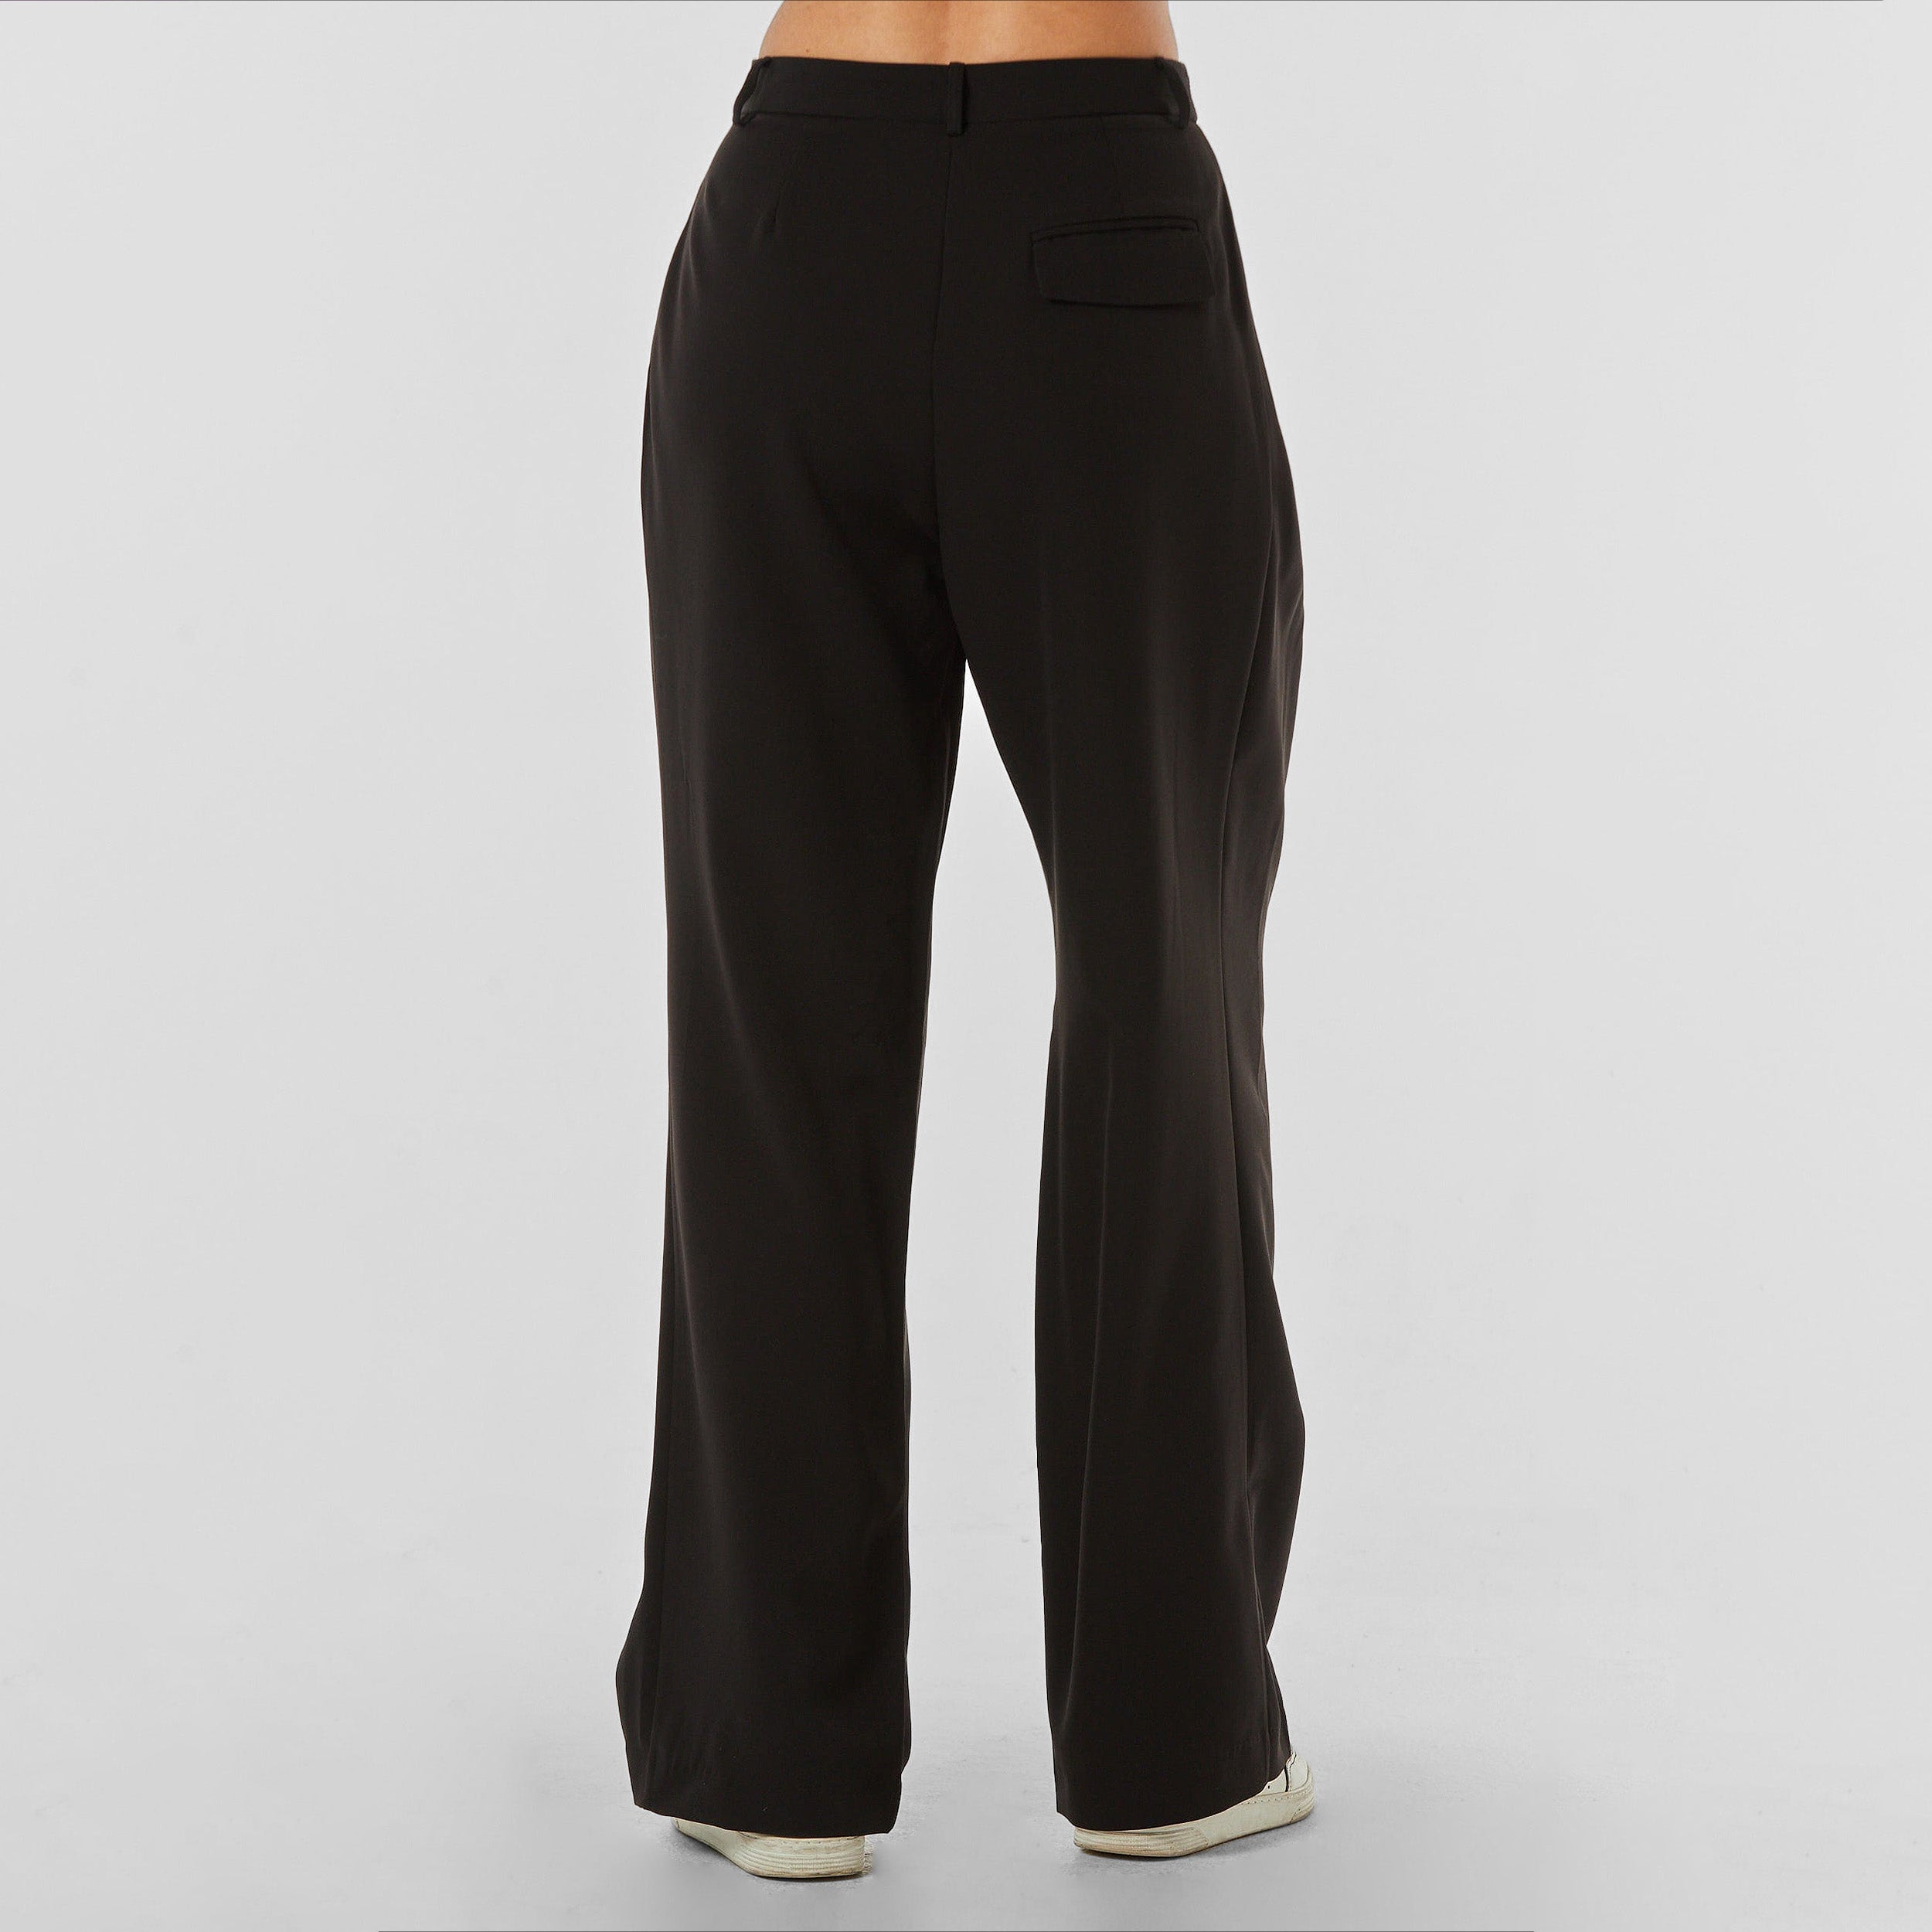 Rear view of woman wearing pleated black trousers with stretch fabric